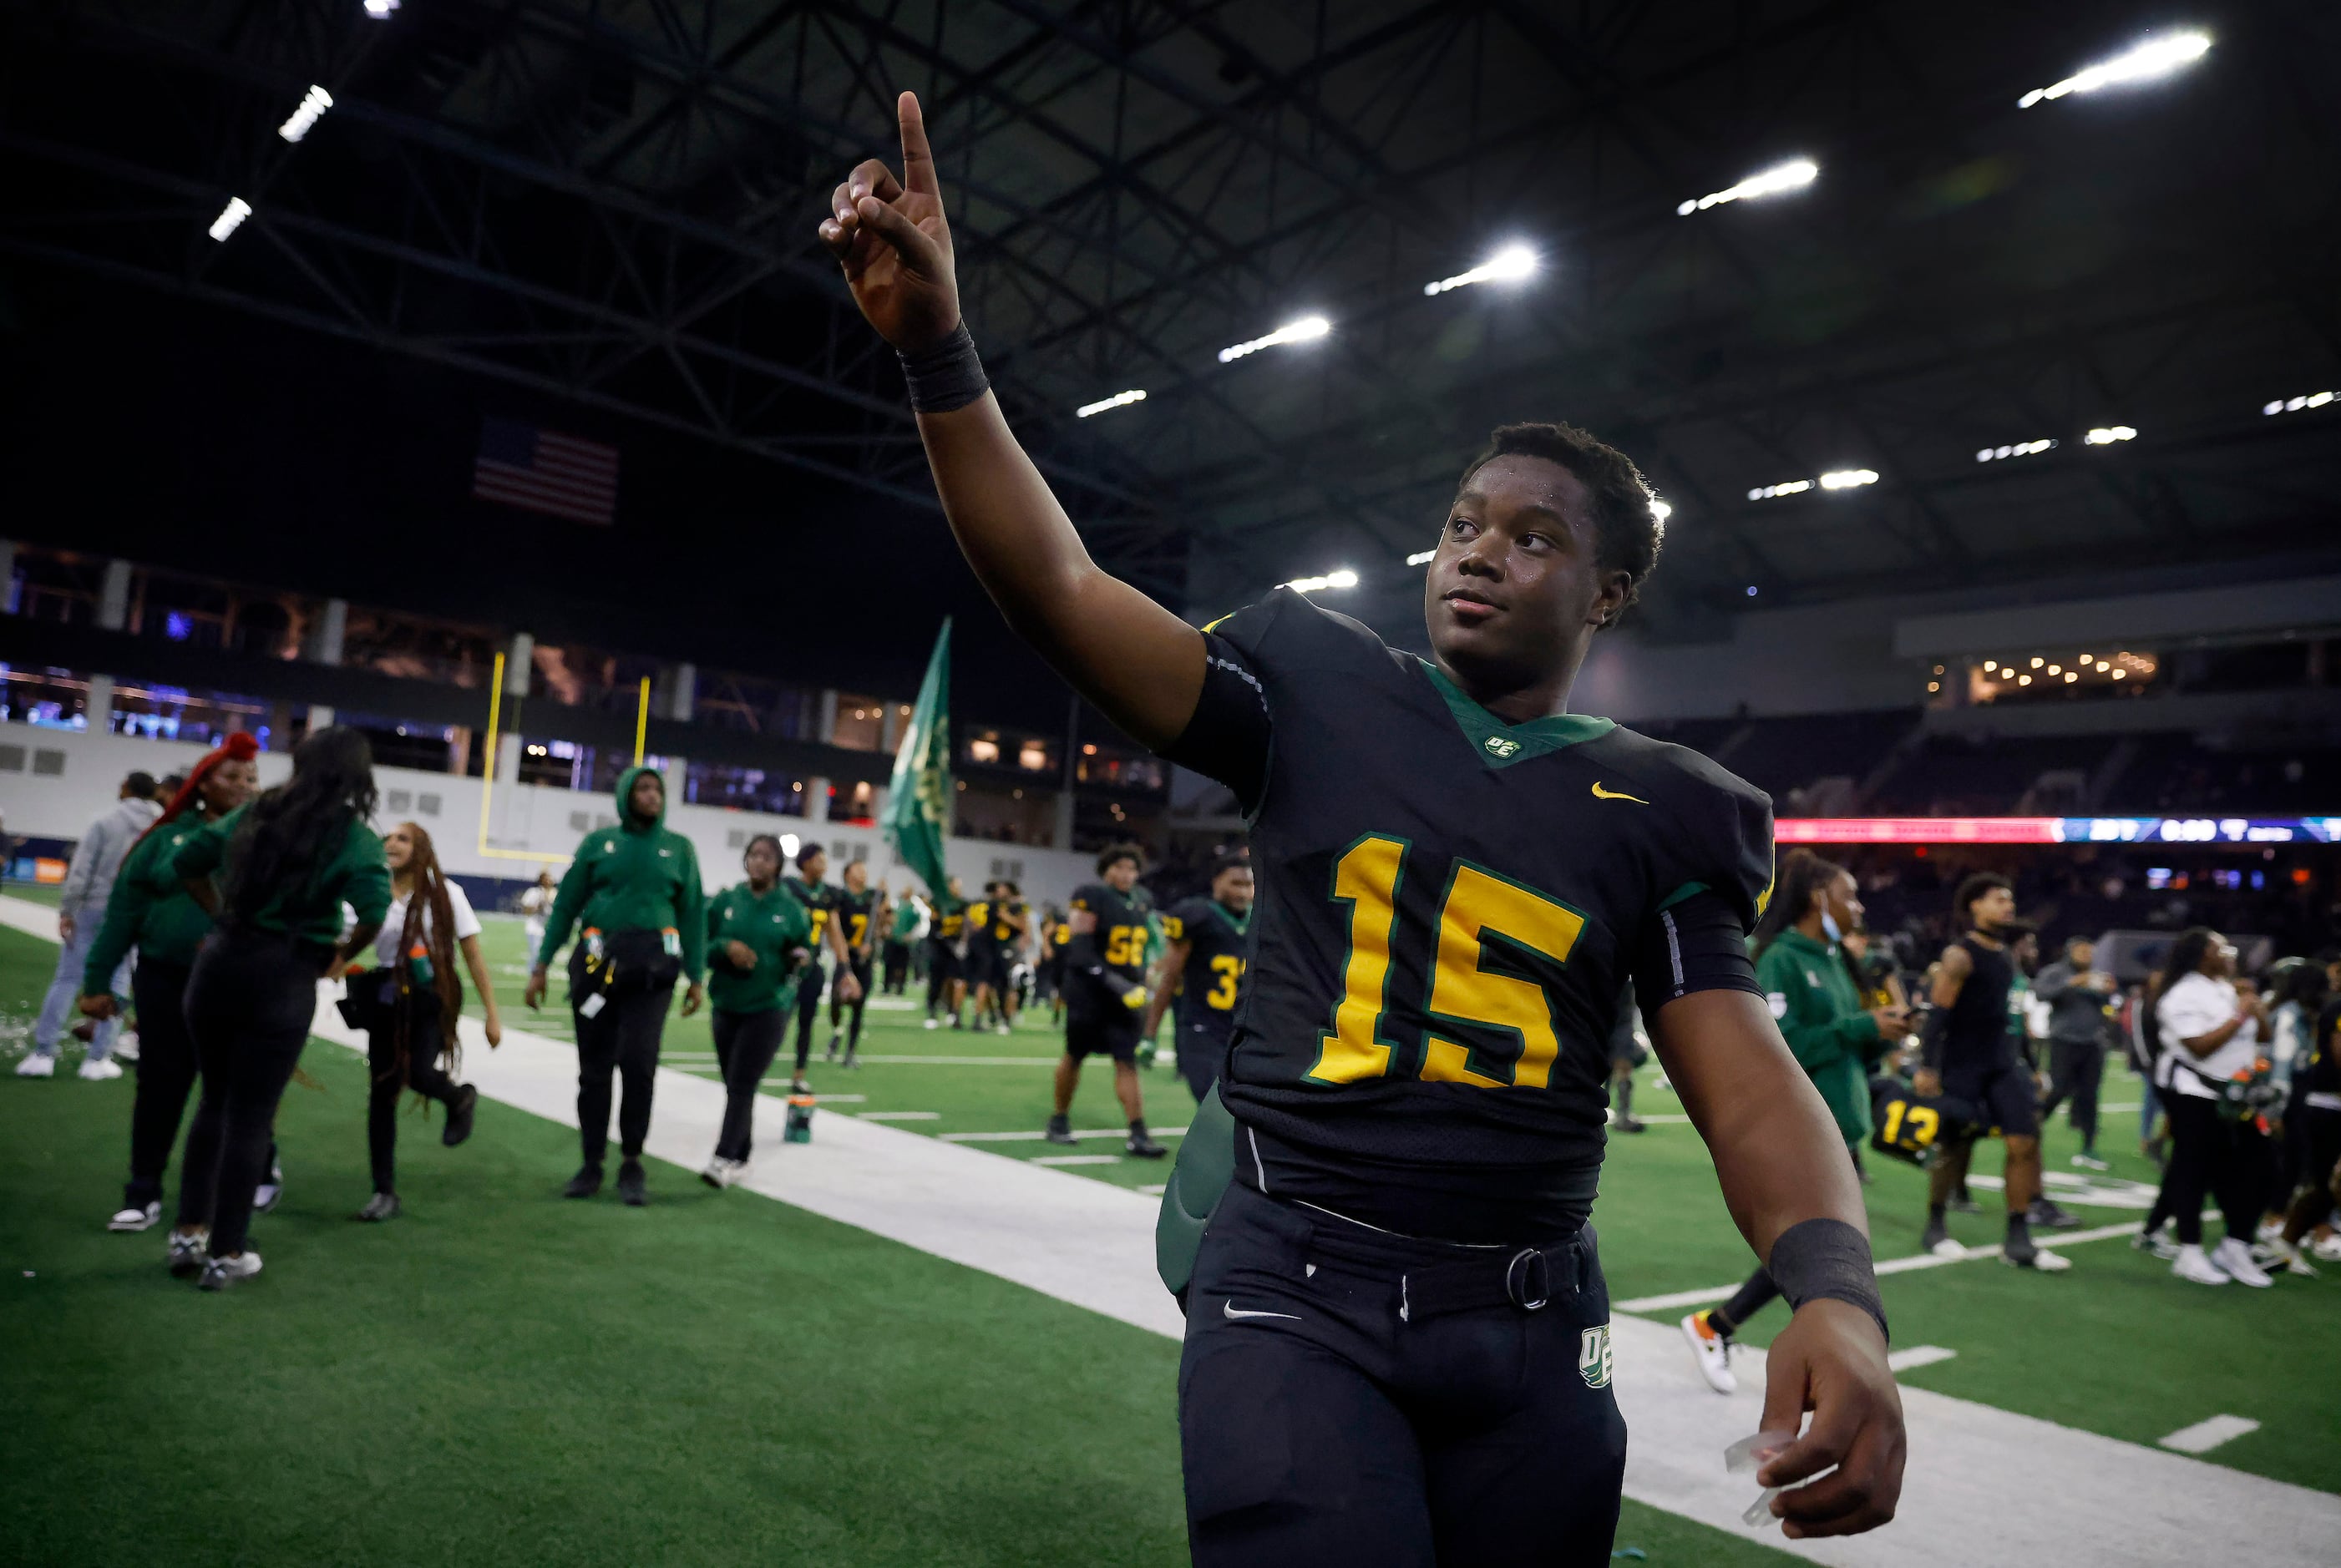 DeSoto quarterback Darius Bailey (15) points to the fans after defeating Denton Guyer in the...